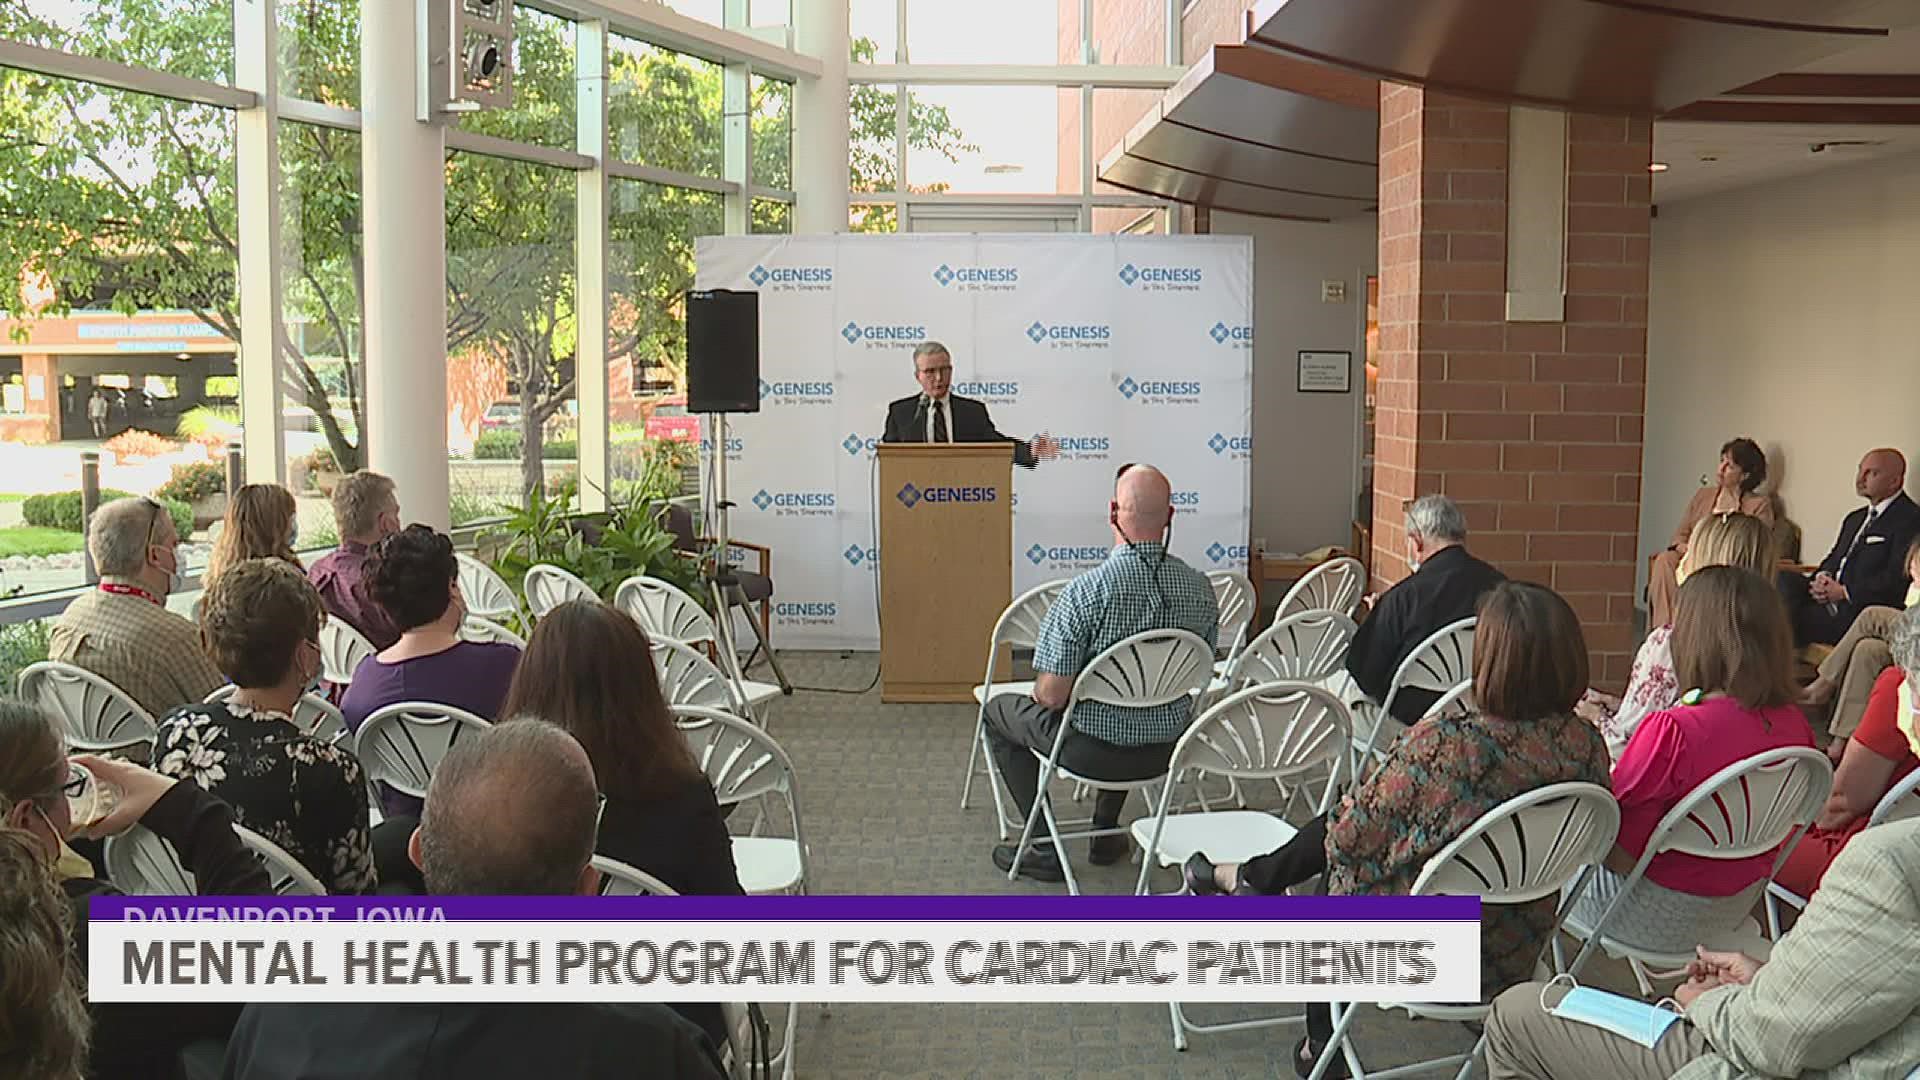 The program is designed to address the mental health concerns that cardiac patients encounter after a cardiac event, such as a heart attack.